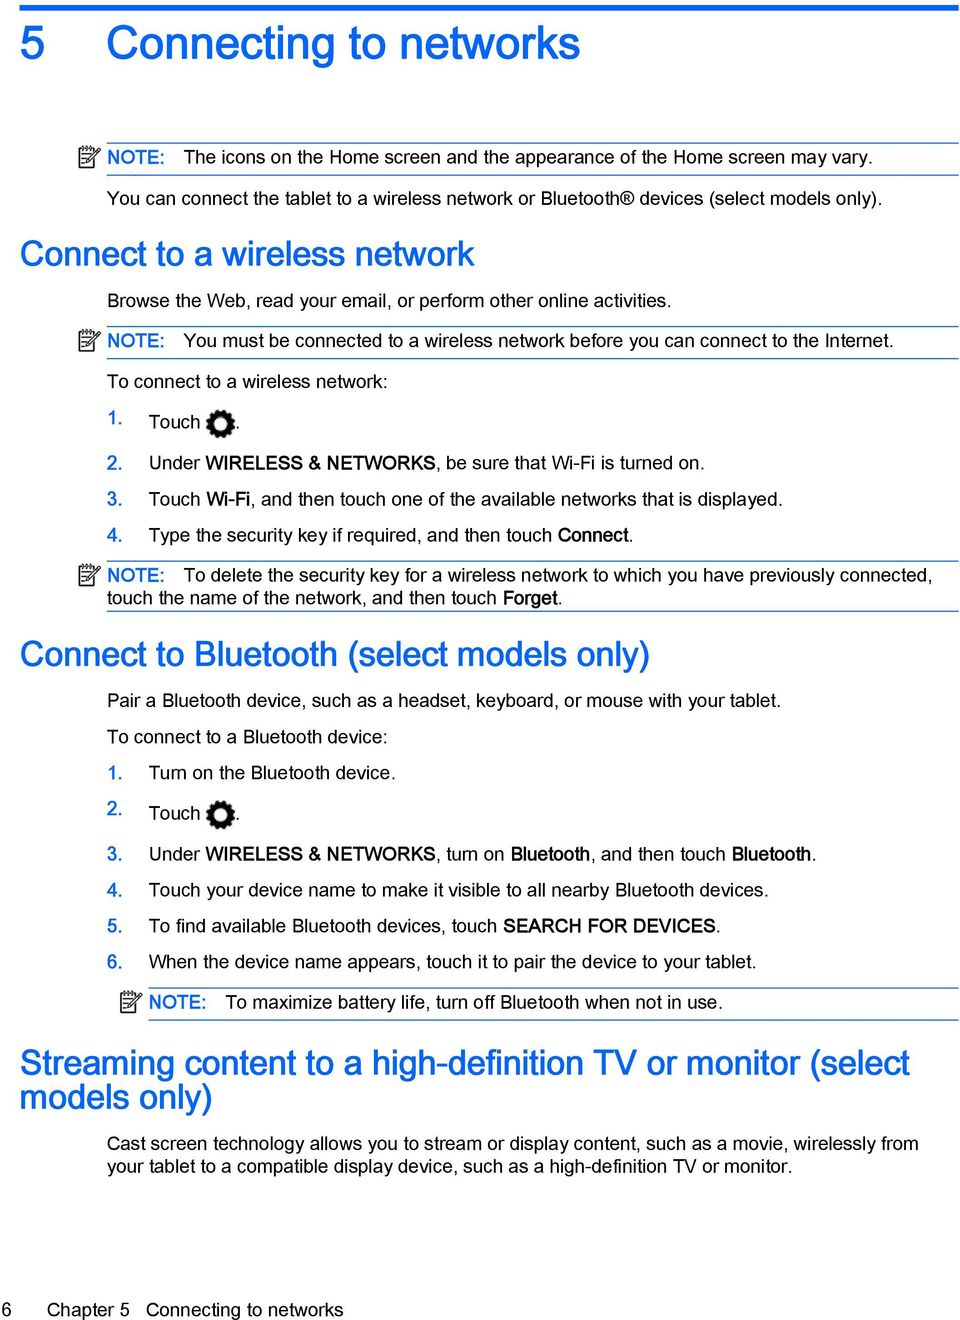 To connect to a wireless network: 1. Touch. 2. Under WIRELESS & NETWORKS, be sure that Wi-Fi is turned on. 3. Touch Wi-Fi, and then touch one of the available networks that is displayed. 4.